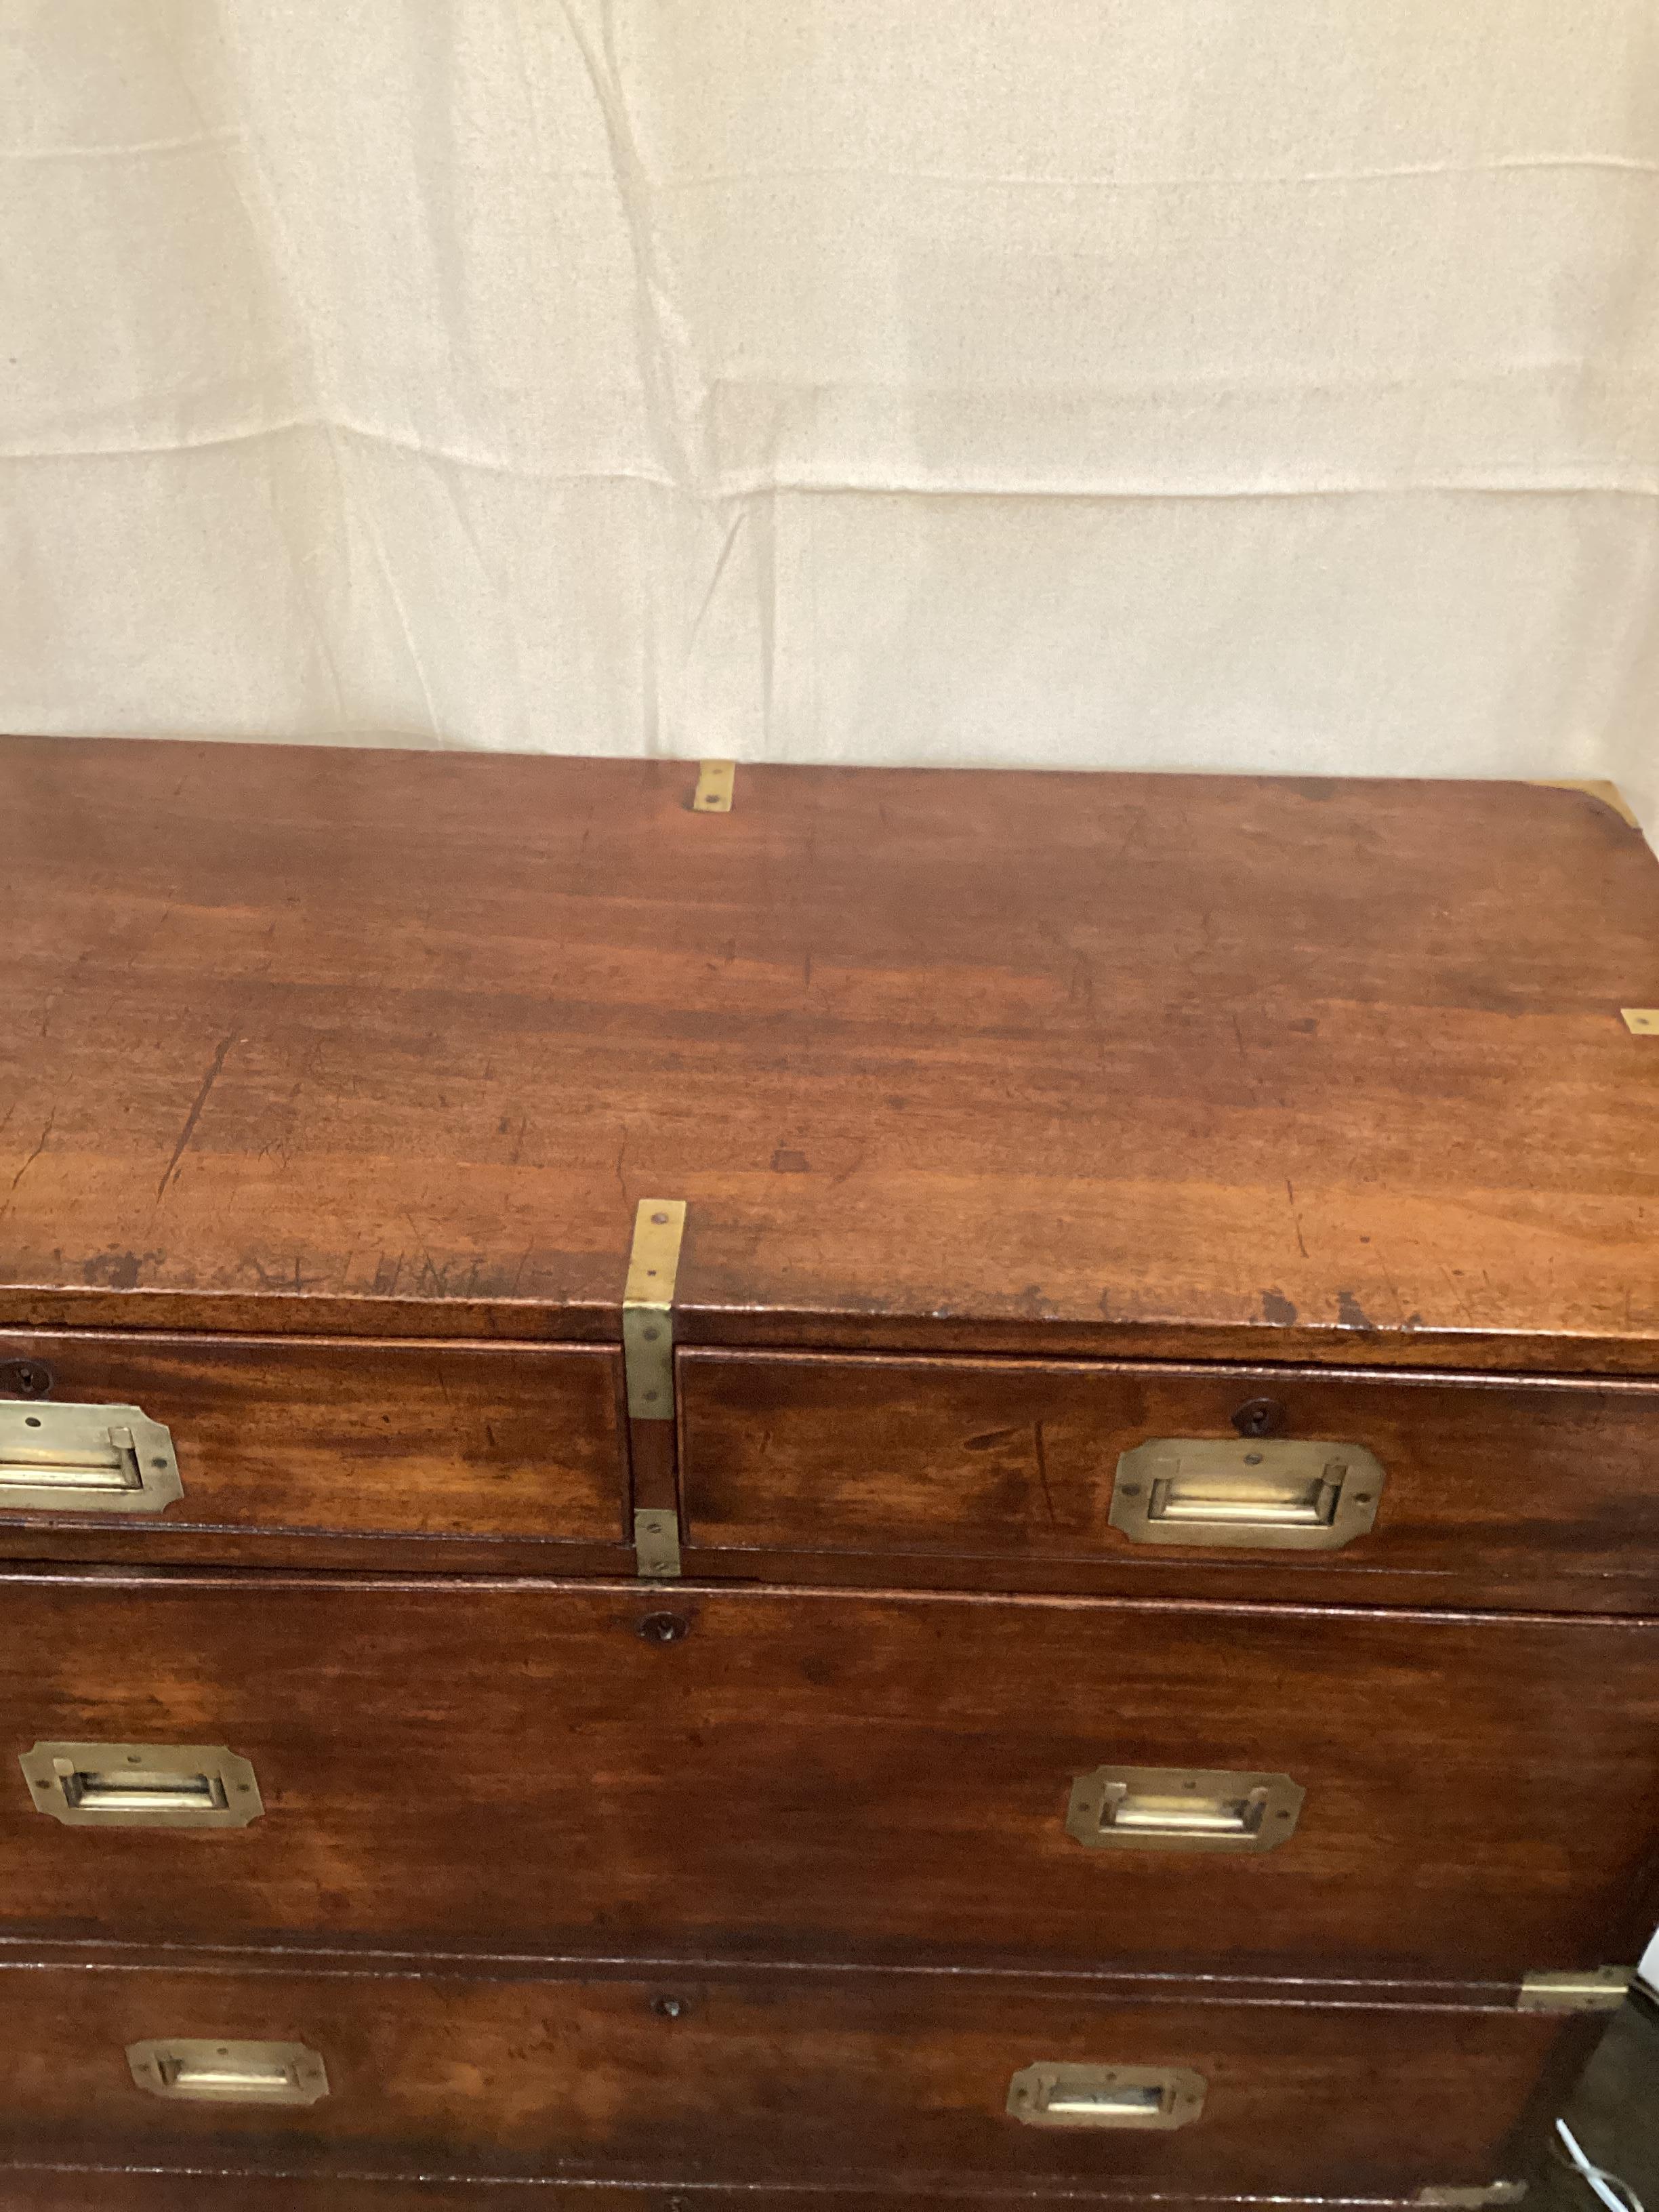 British Military Officers Mahogany 2 part Campaign Chest with brass mounting. These chests were commissioned by officers of the British Army during their various campaigns around the world and were constructed to each individual soldier’s own style.